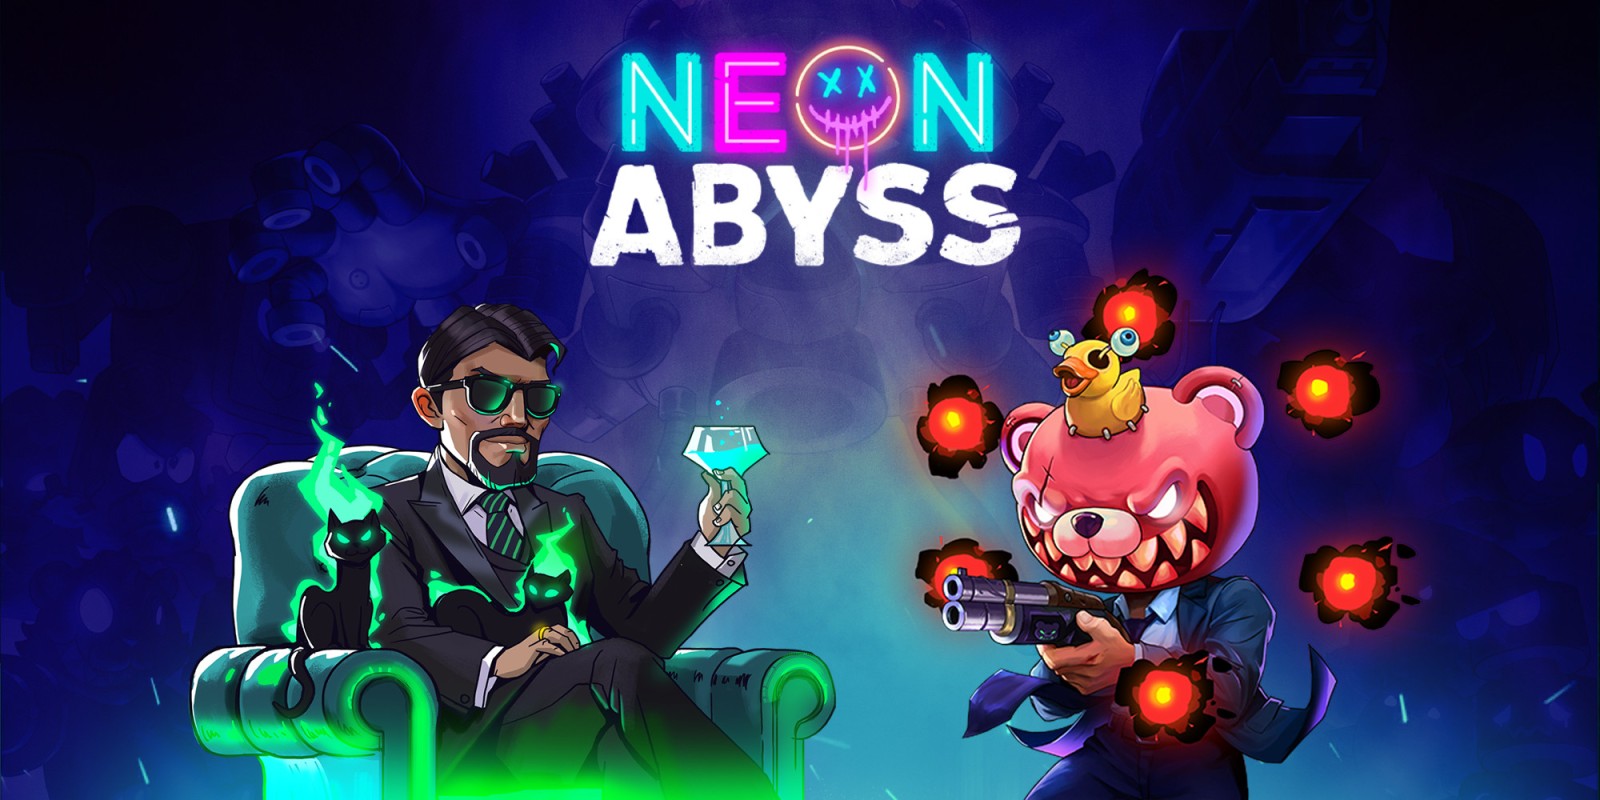 Neon Abyss | Nintendo Switch download software | Games | Nintendo